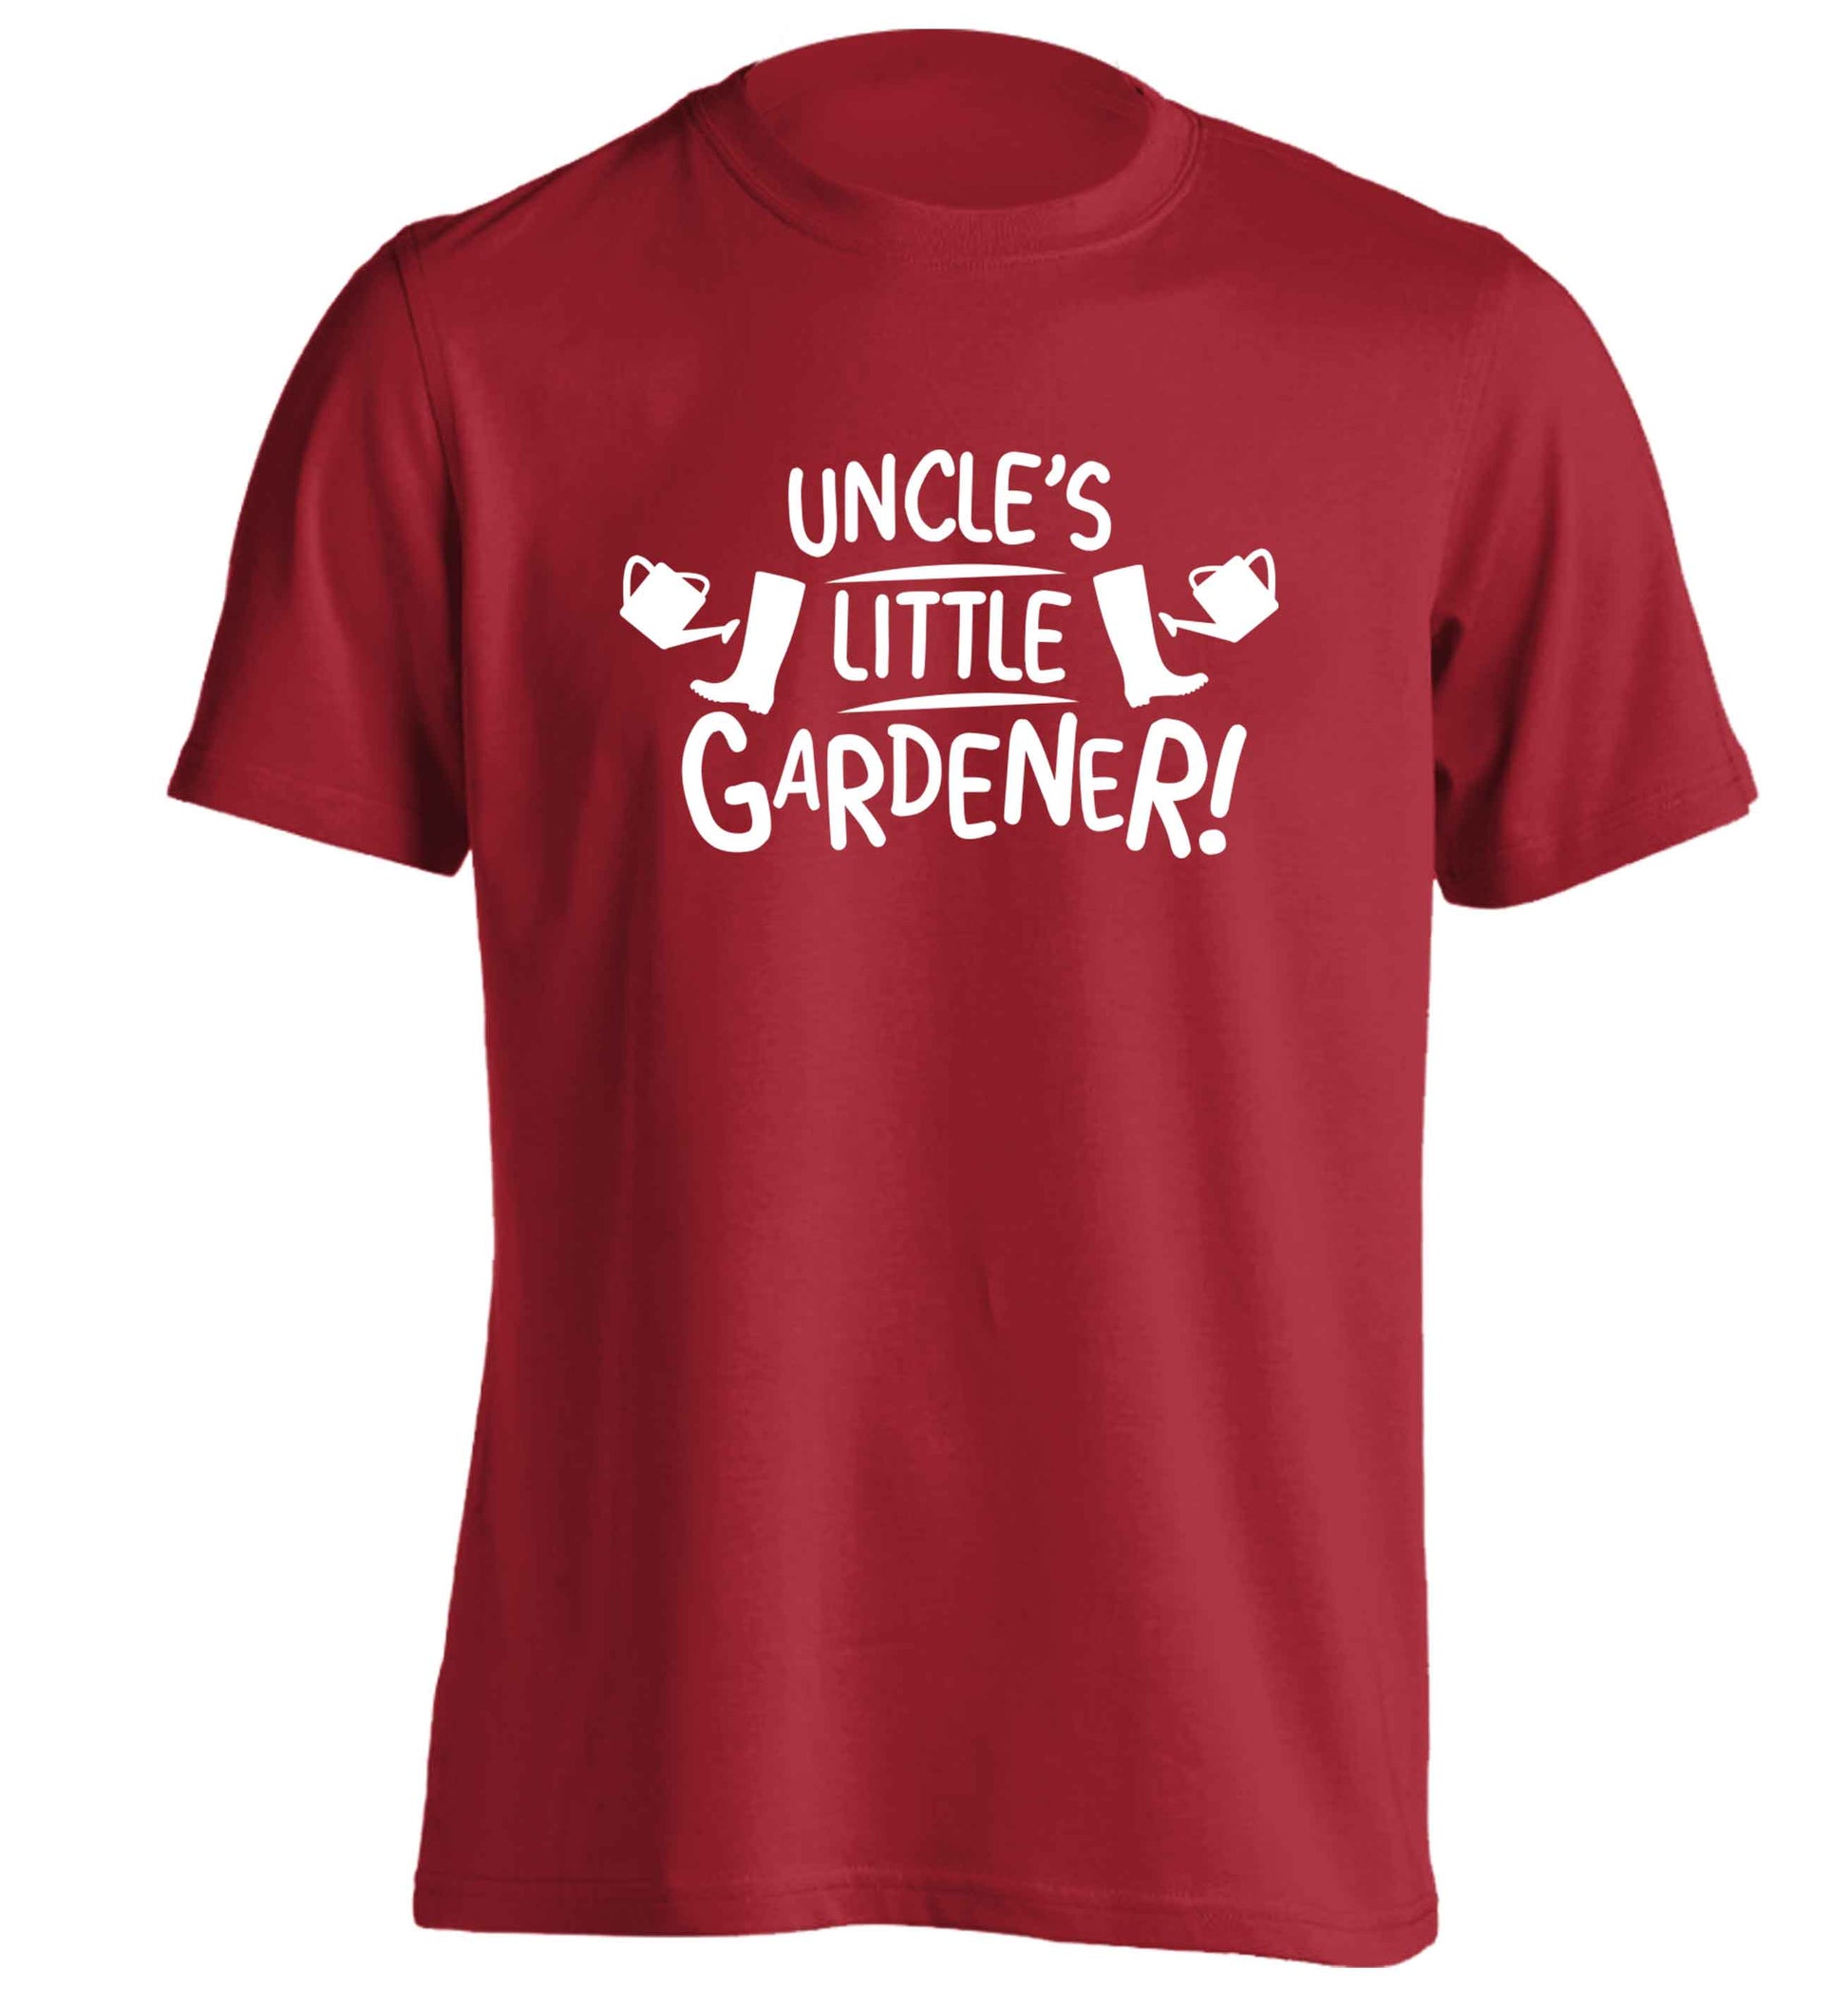 Uncle's little gardener adults unisex red Tshirt 2XL